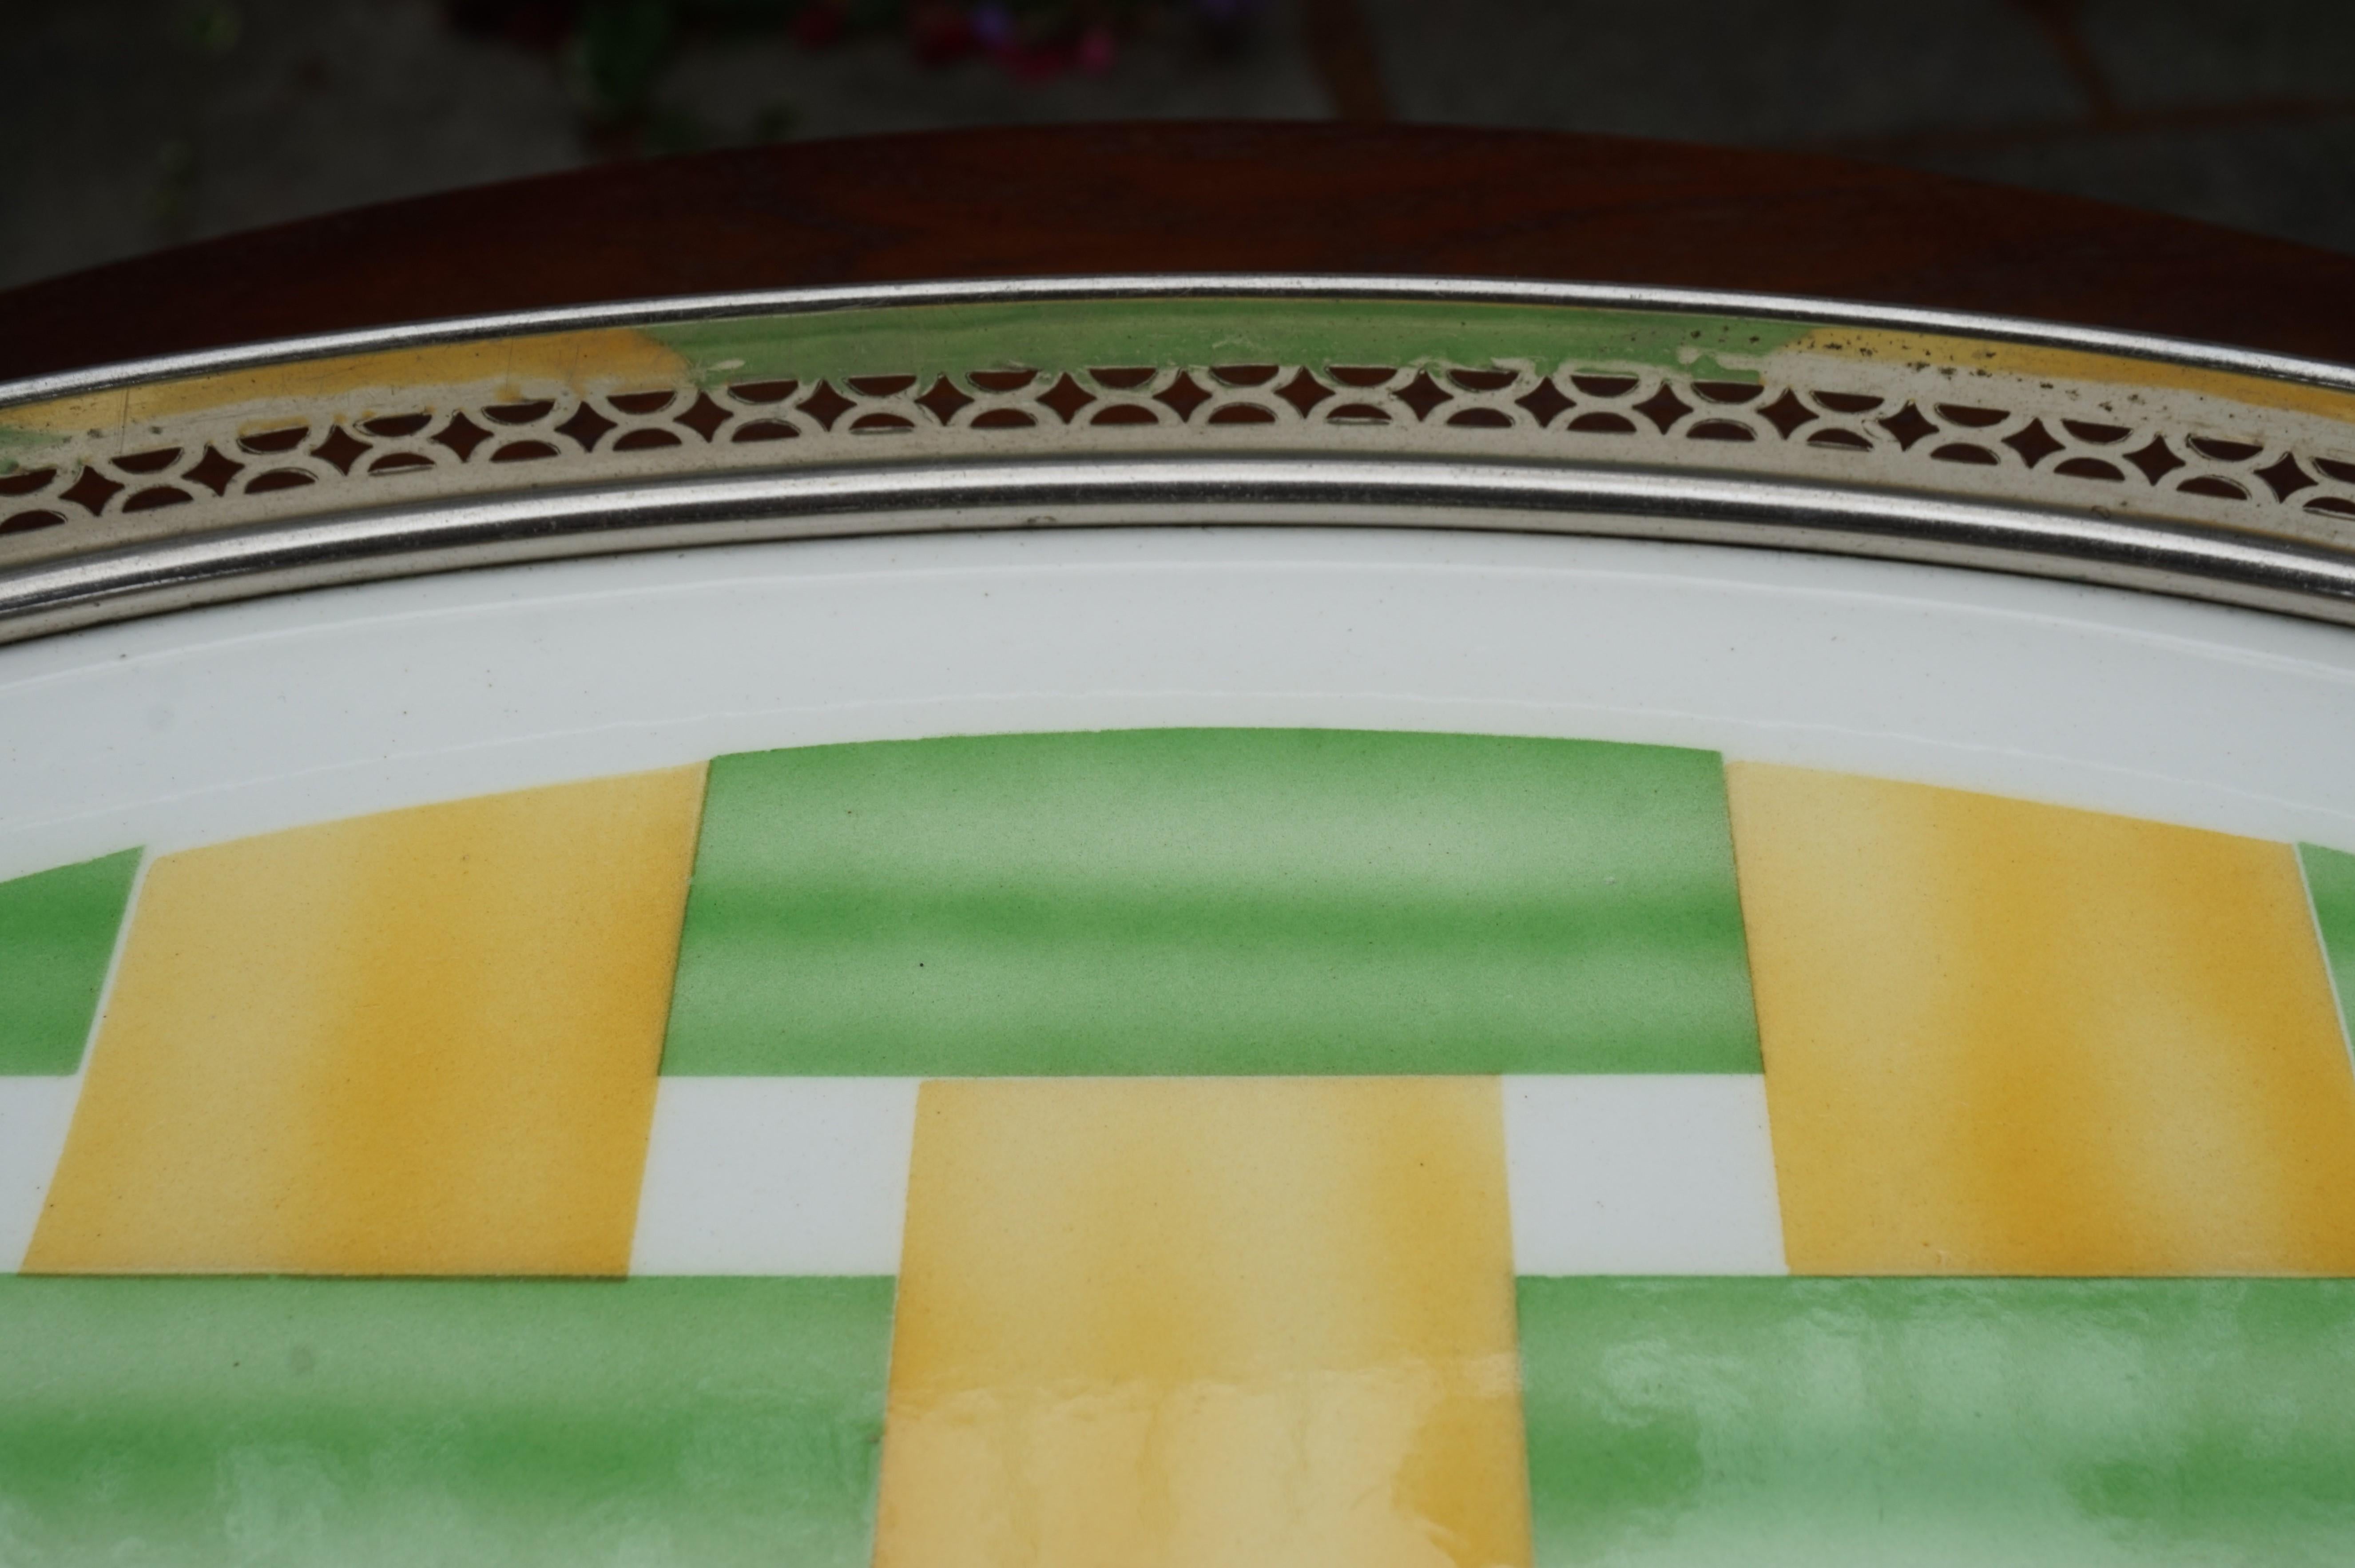 green serving tray